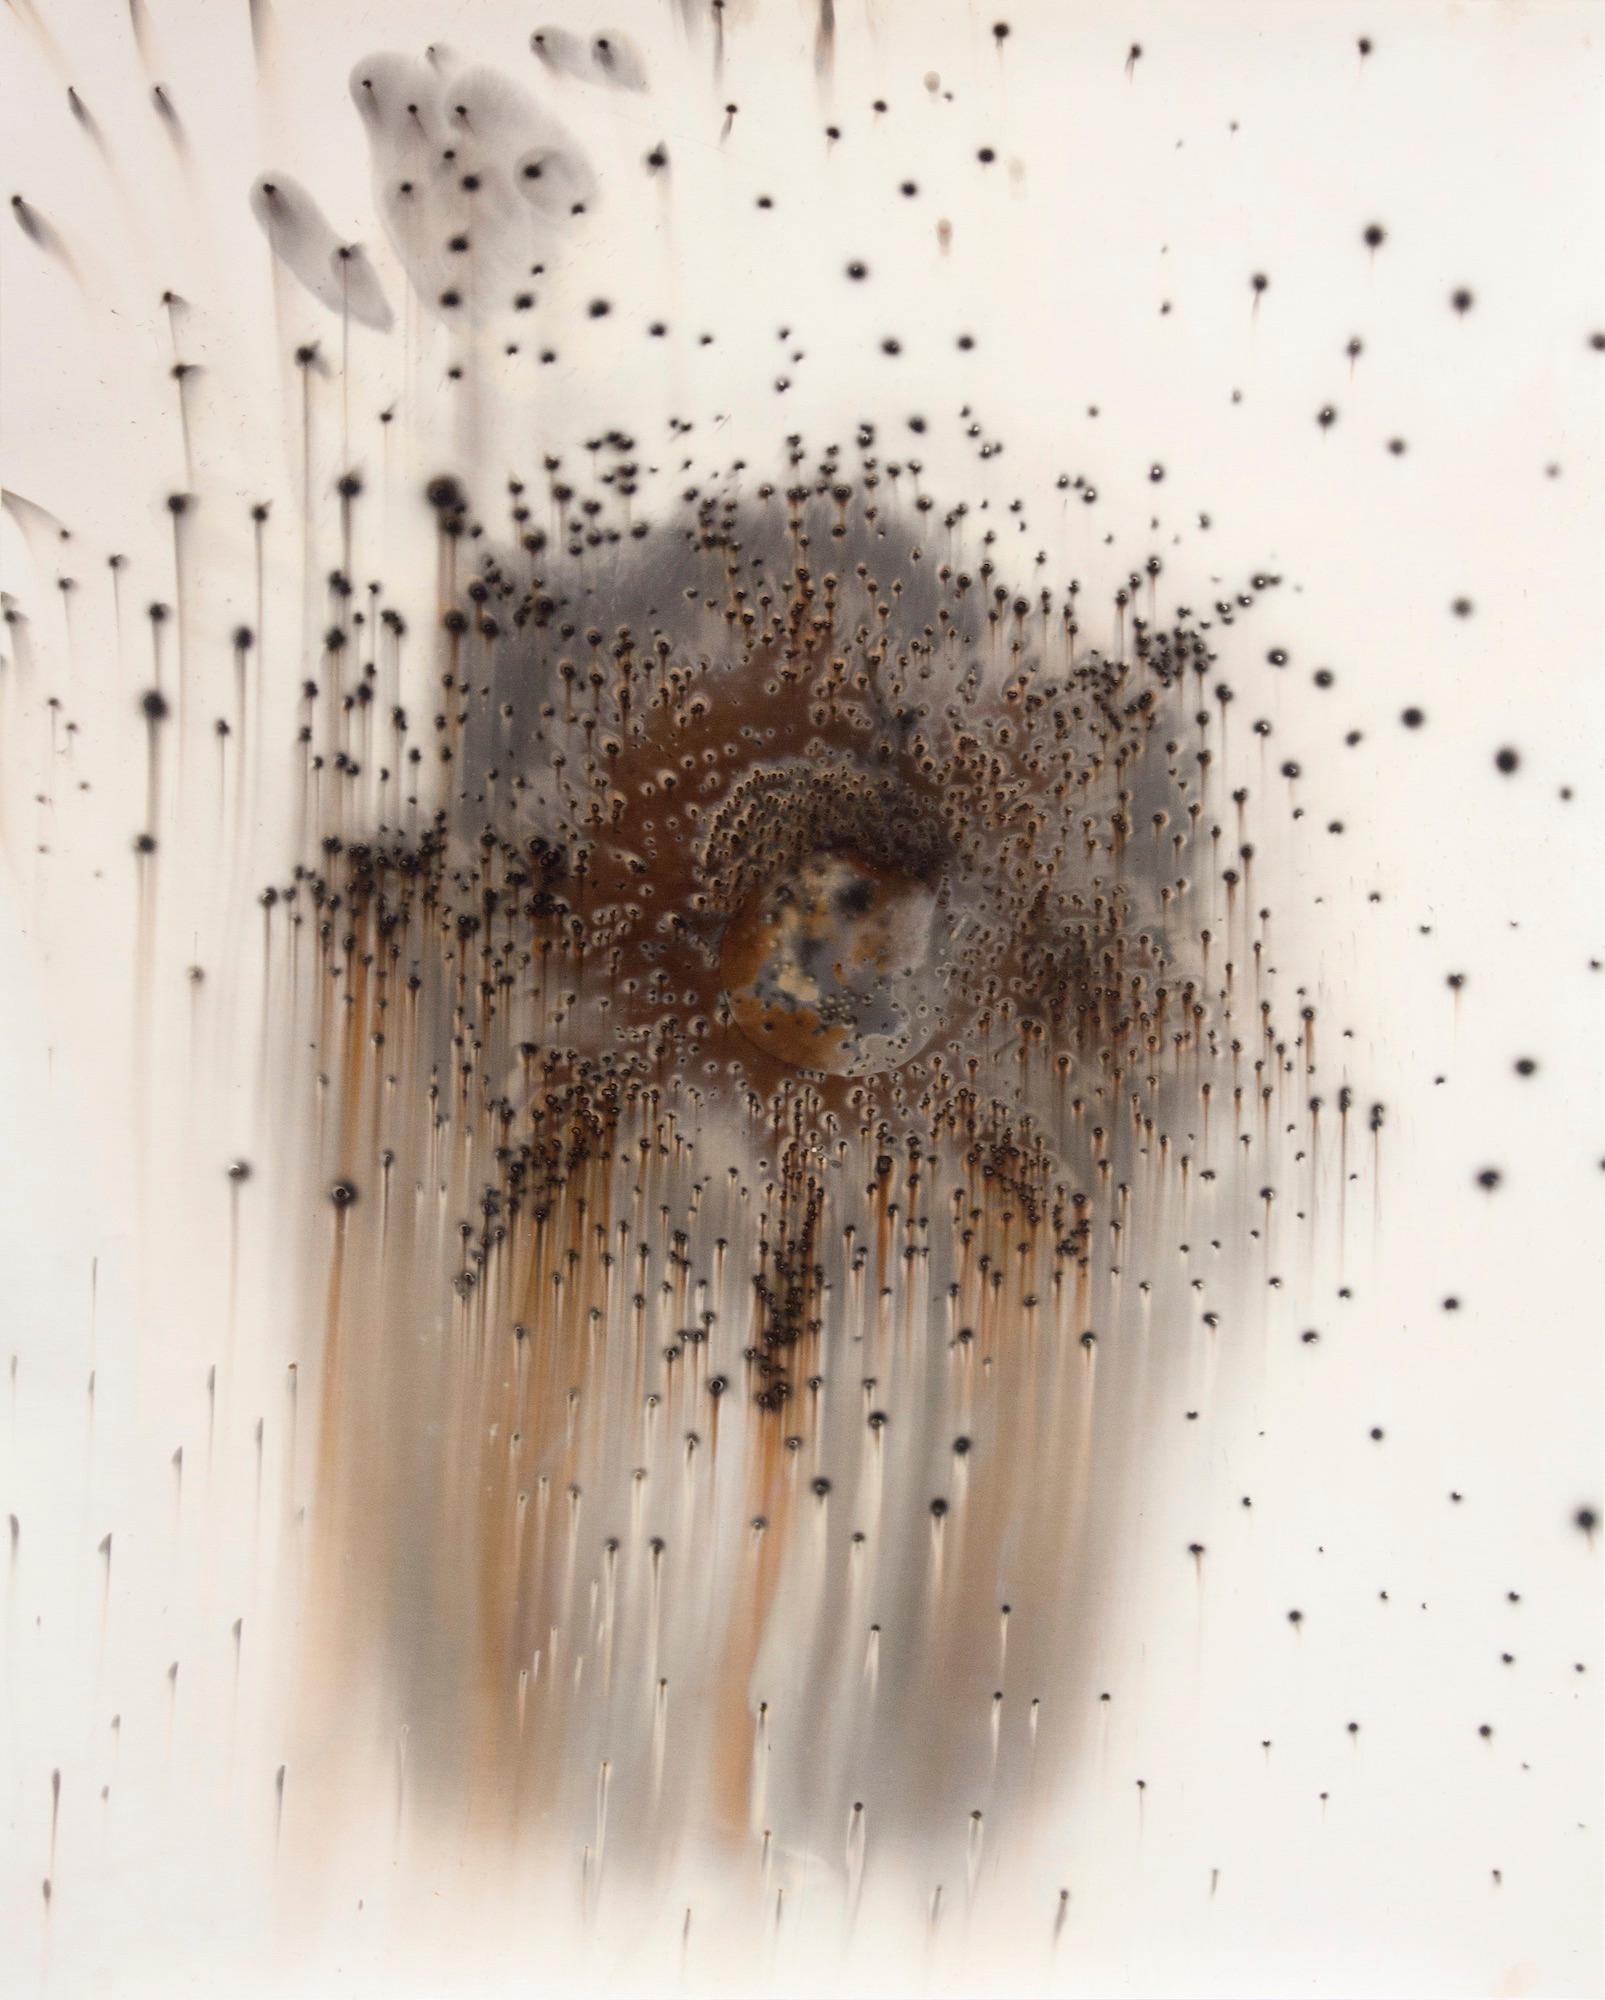 Christopher Colville Abstract Photograph - Untitled Work of Fire (Star)